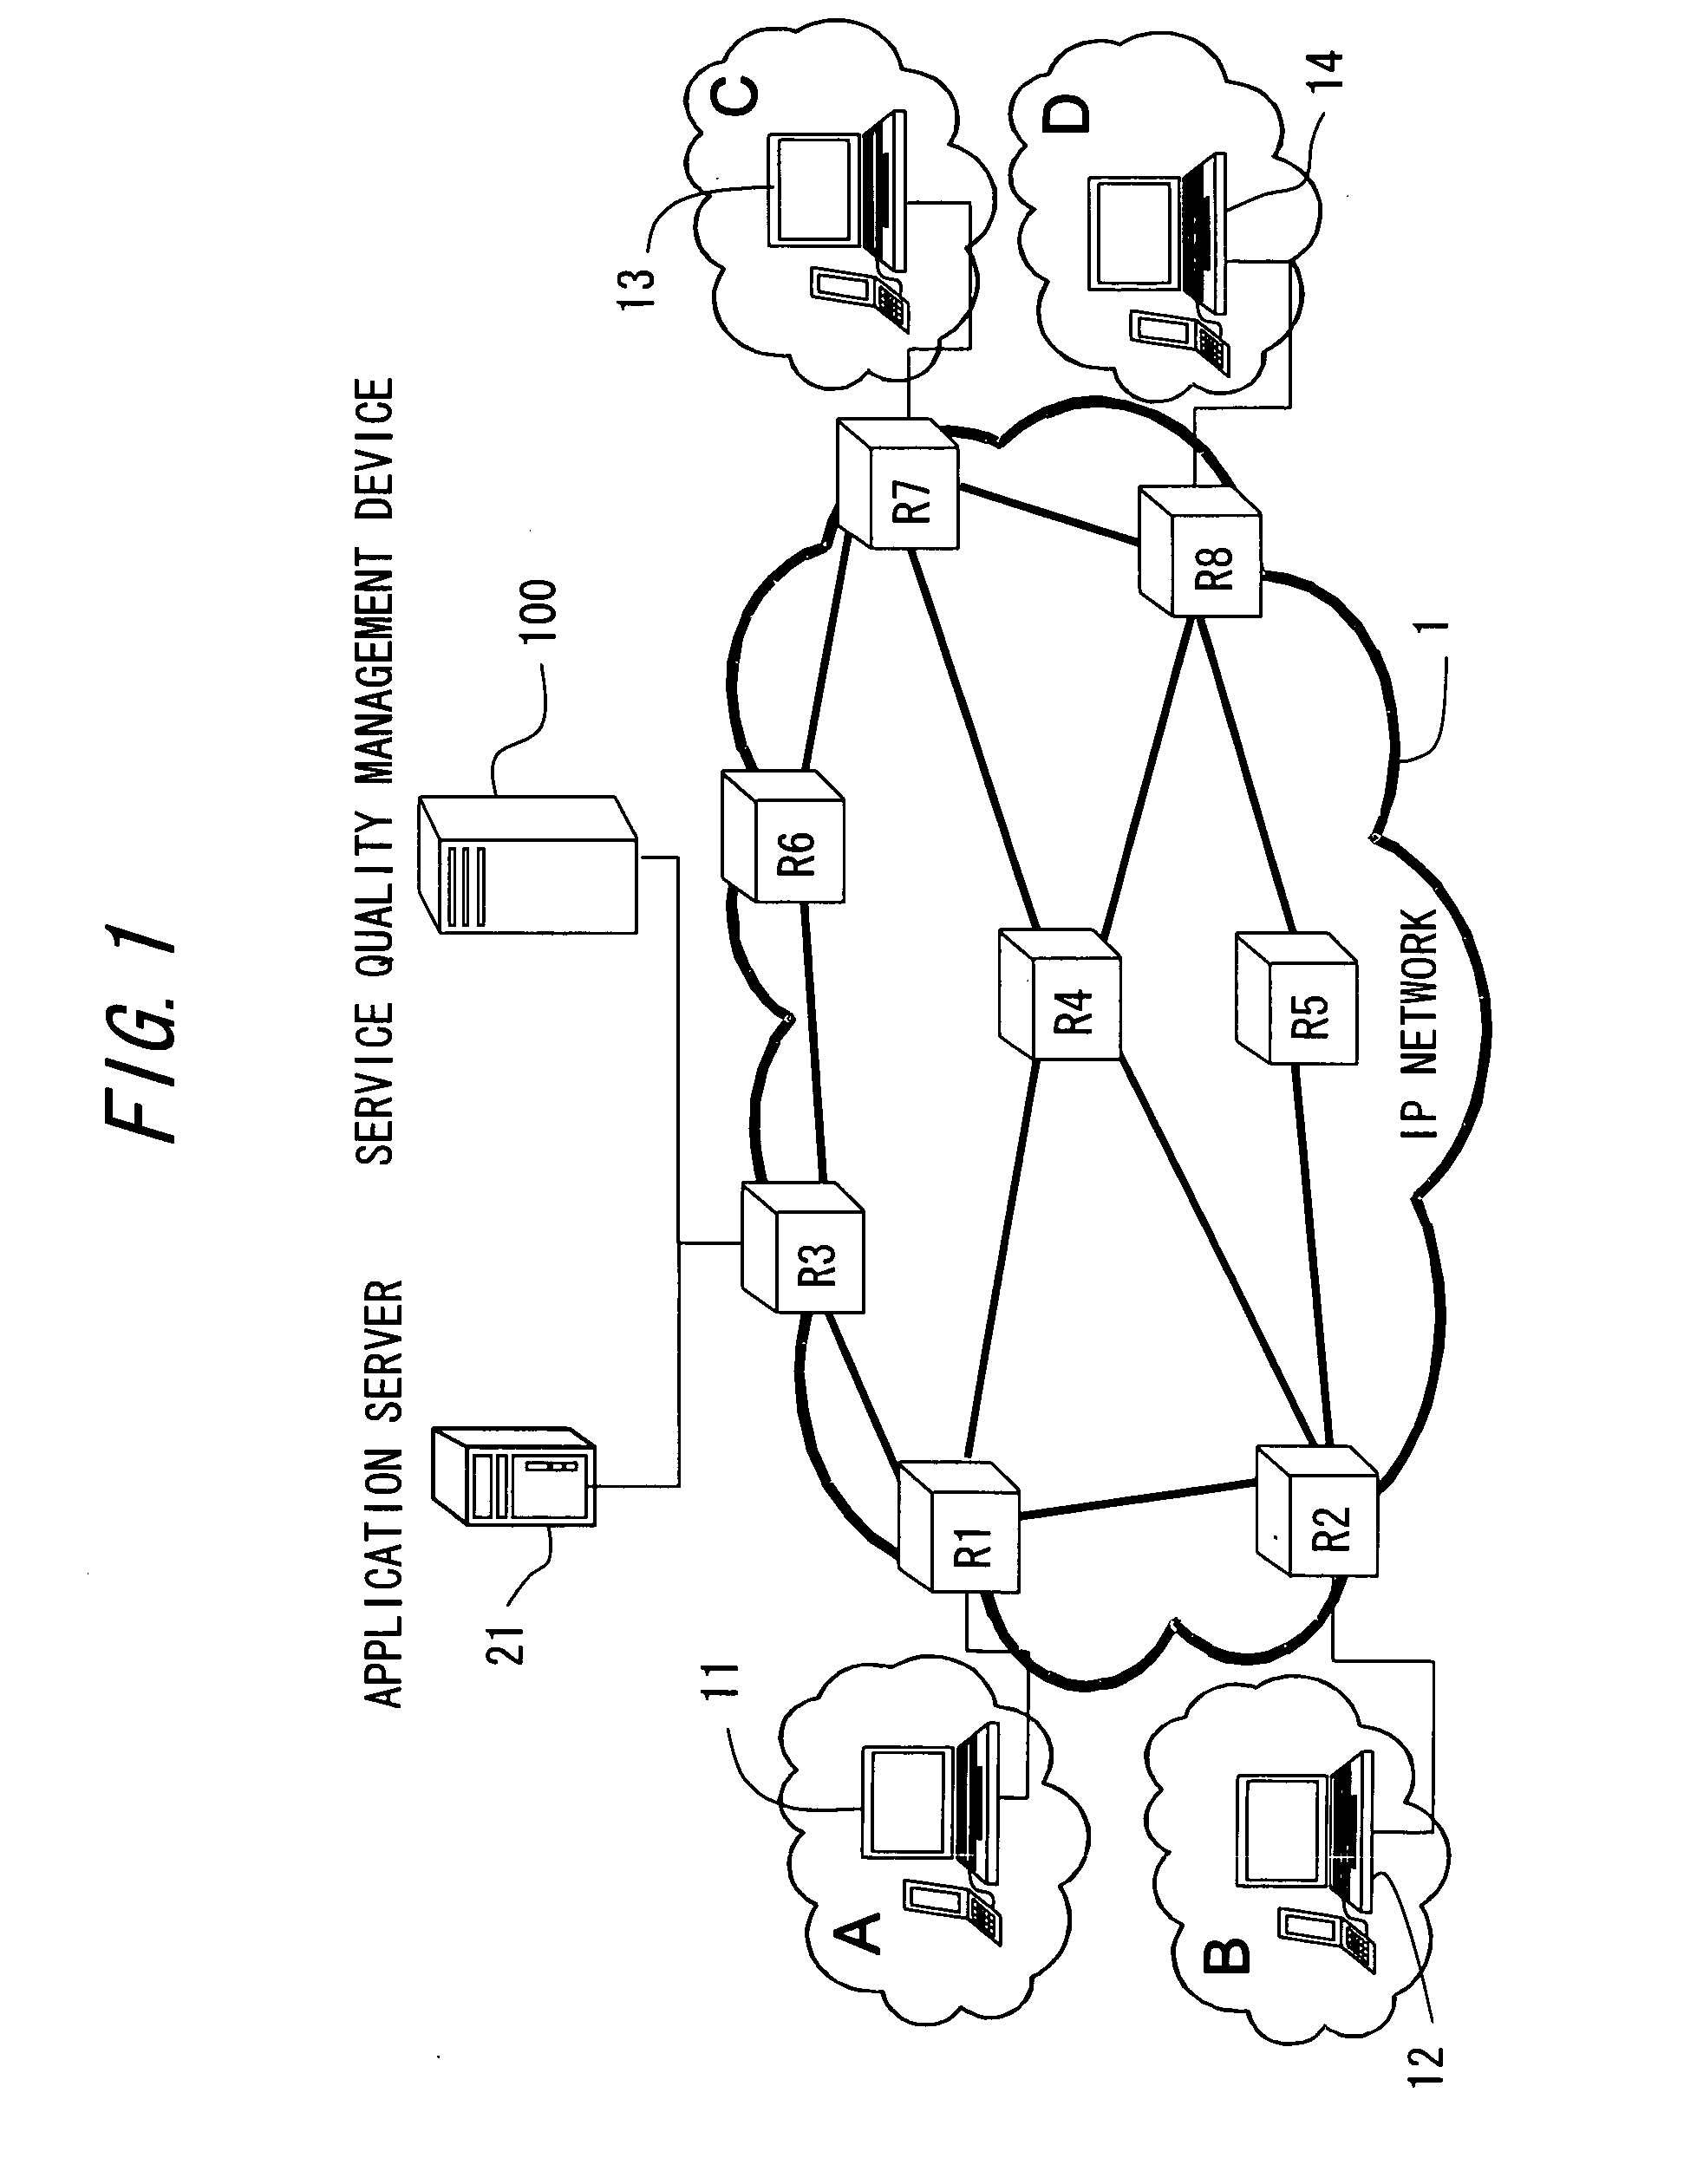 Service quality management device and service quality management method